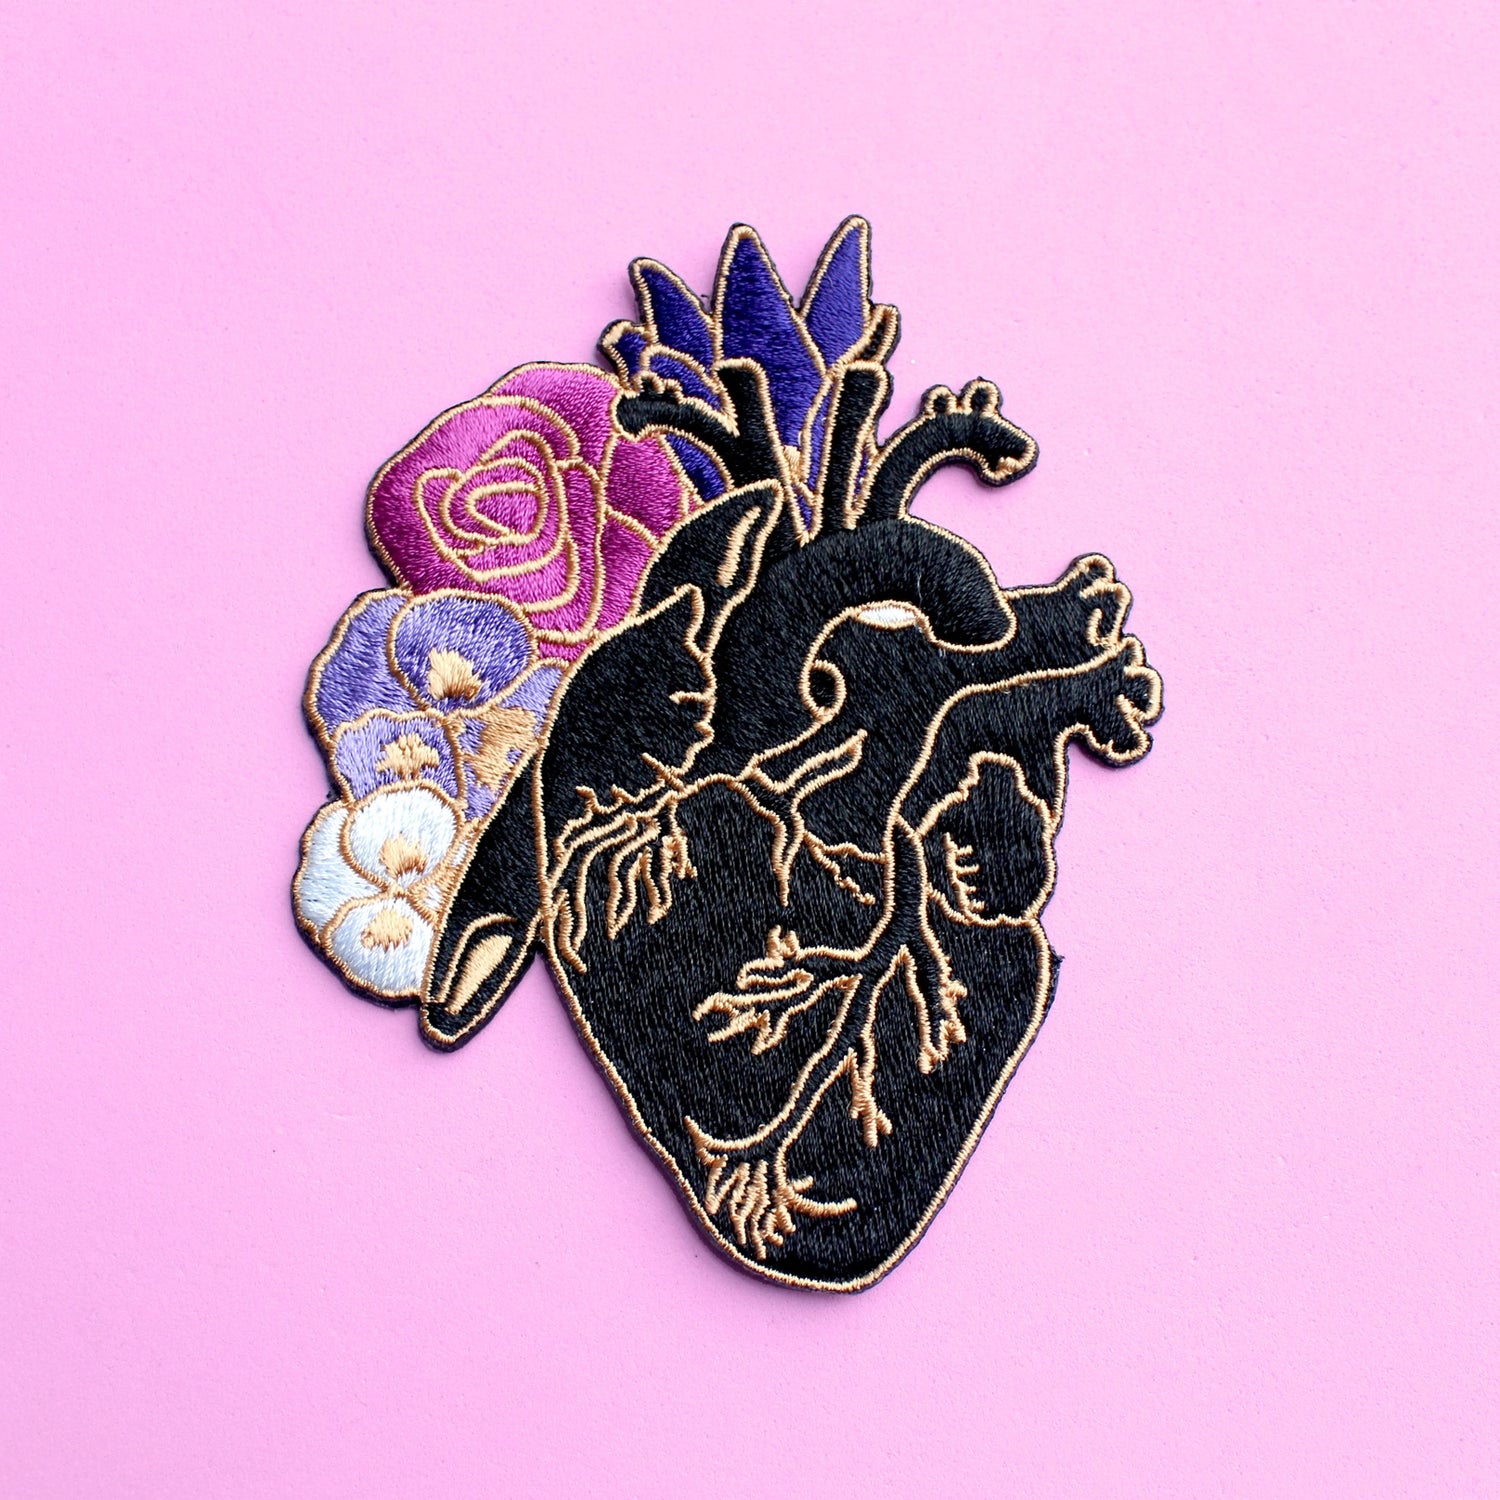 Anatomical Heart Embroidered Iron-On Patch - Moon Room Shop and Wellness